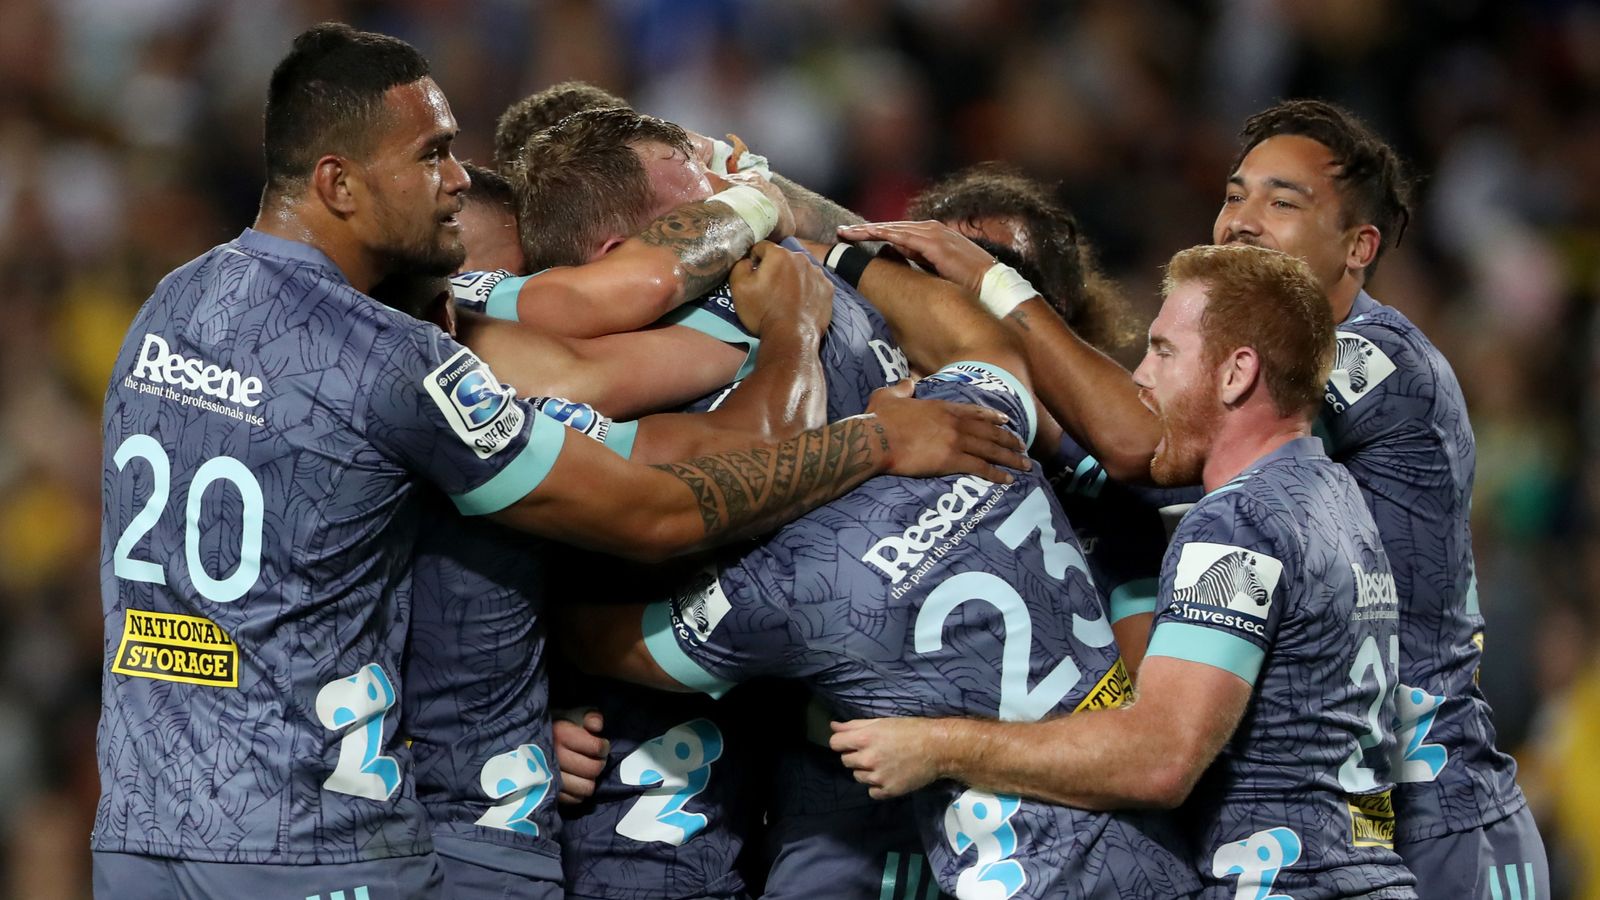 Super Rugby Aotearoa New Zealands Super Rugby teams launch domestic competition Rugby Union News Sky Sports